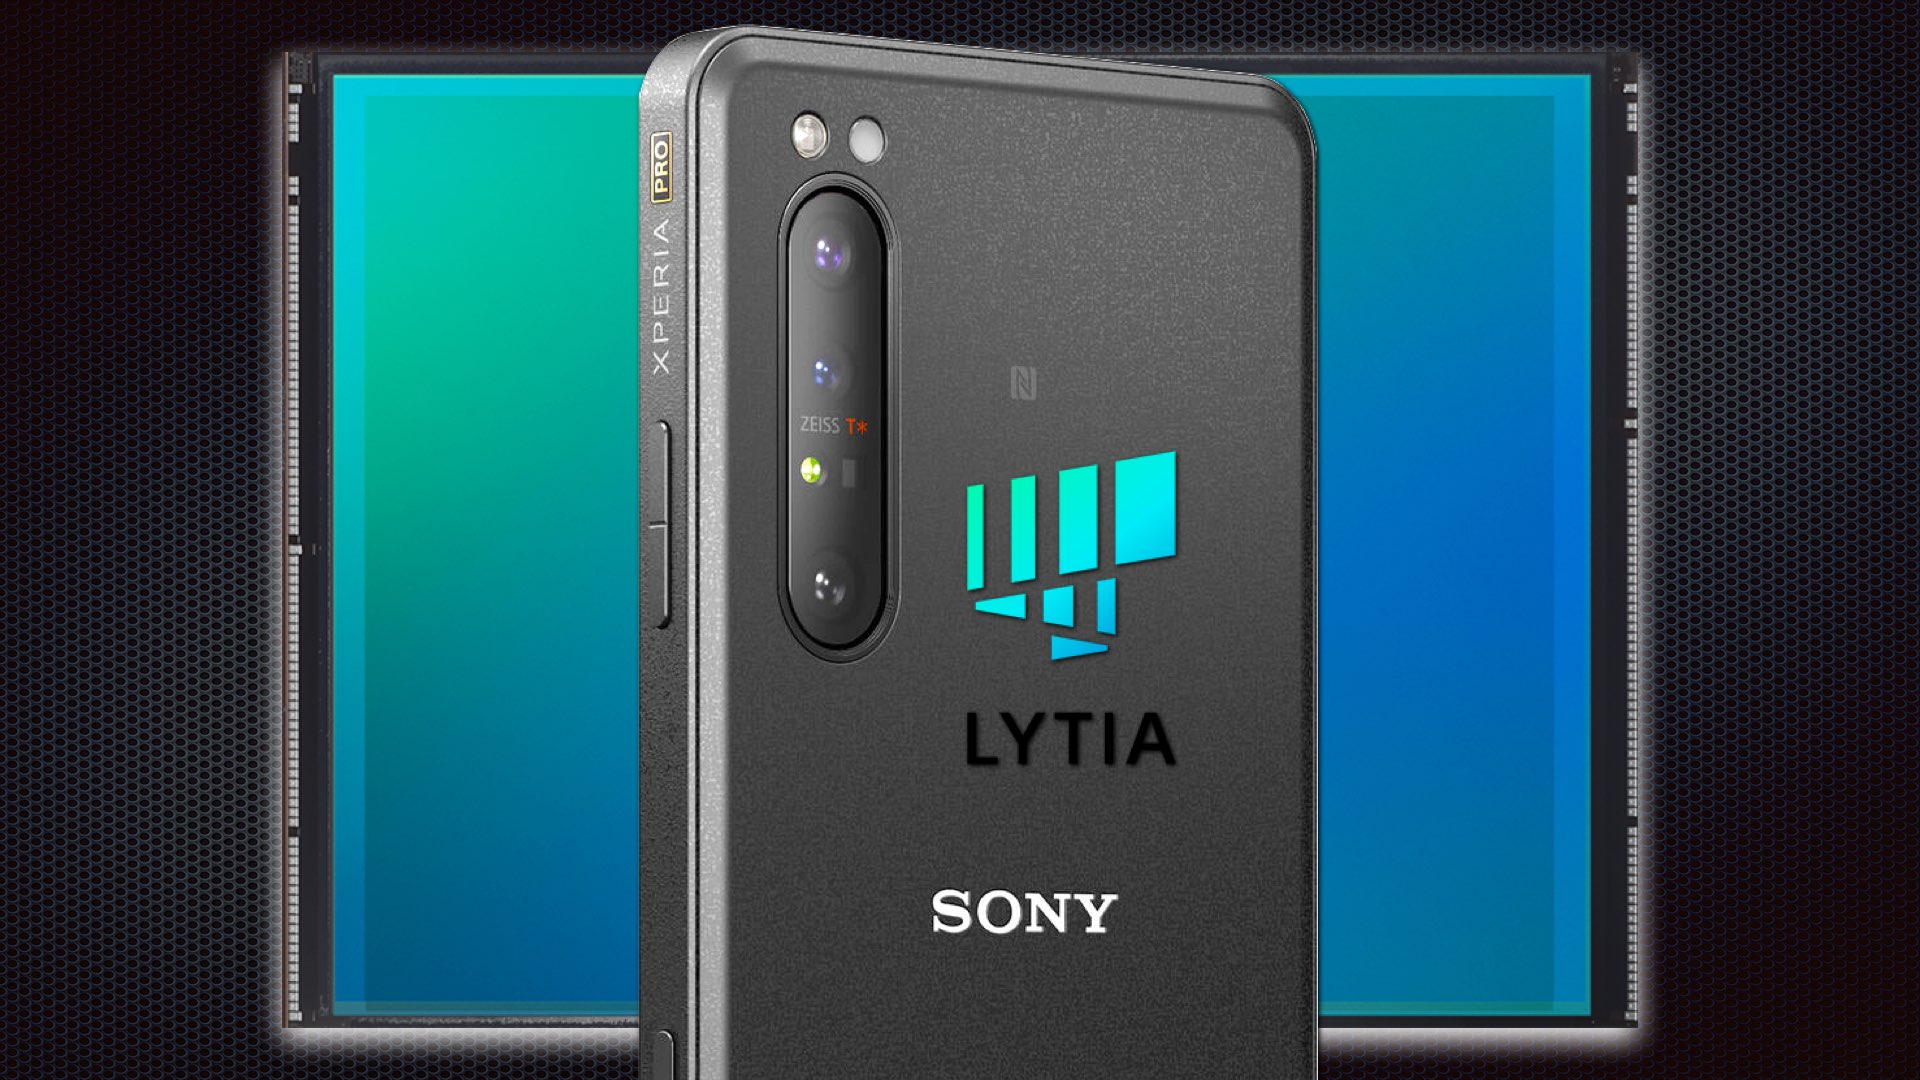 Sony Presents LYTIA: A New Brand Name for its Mobile Image Sensors